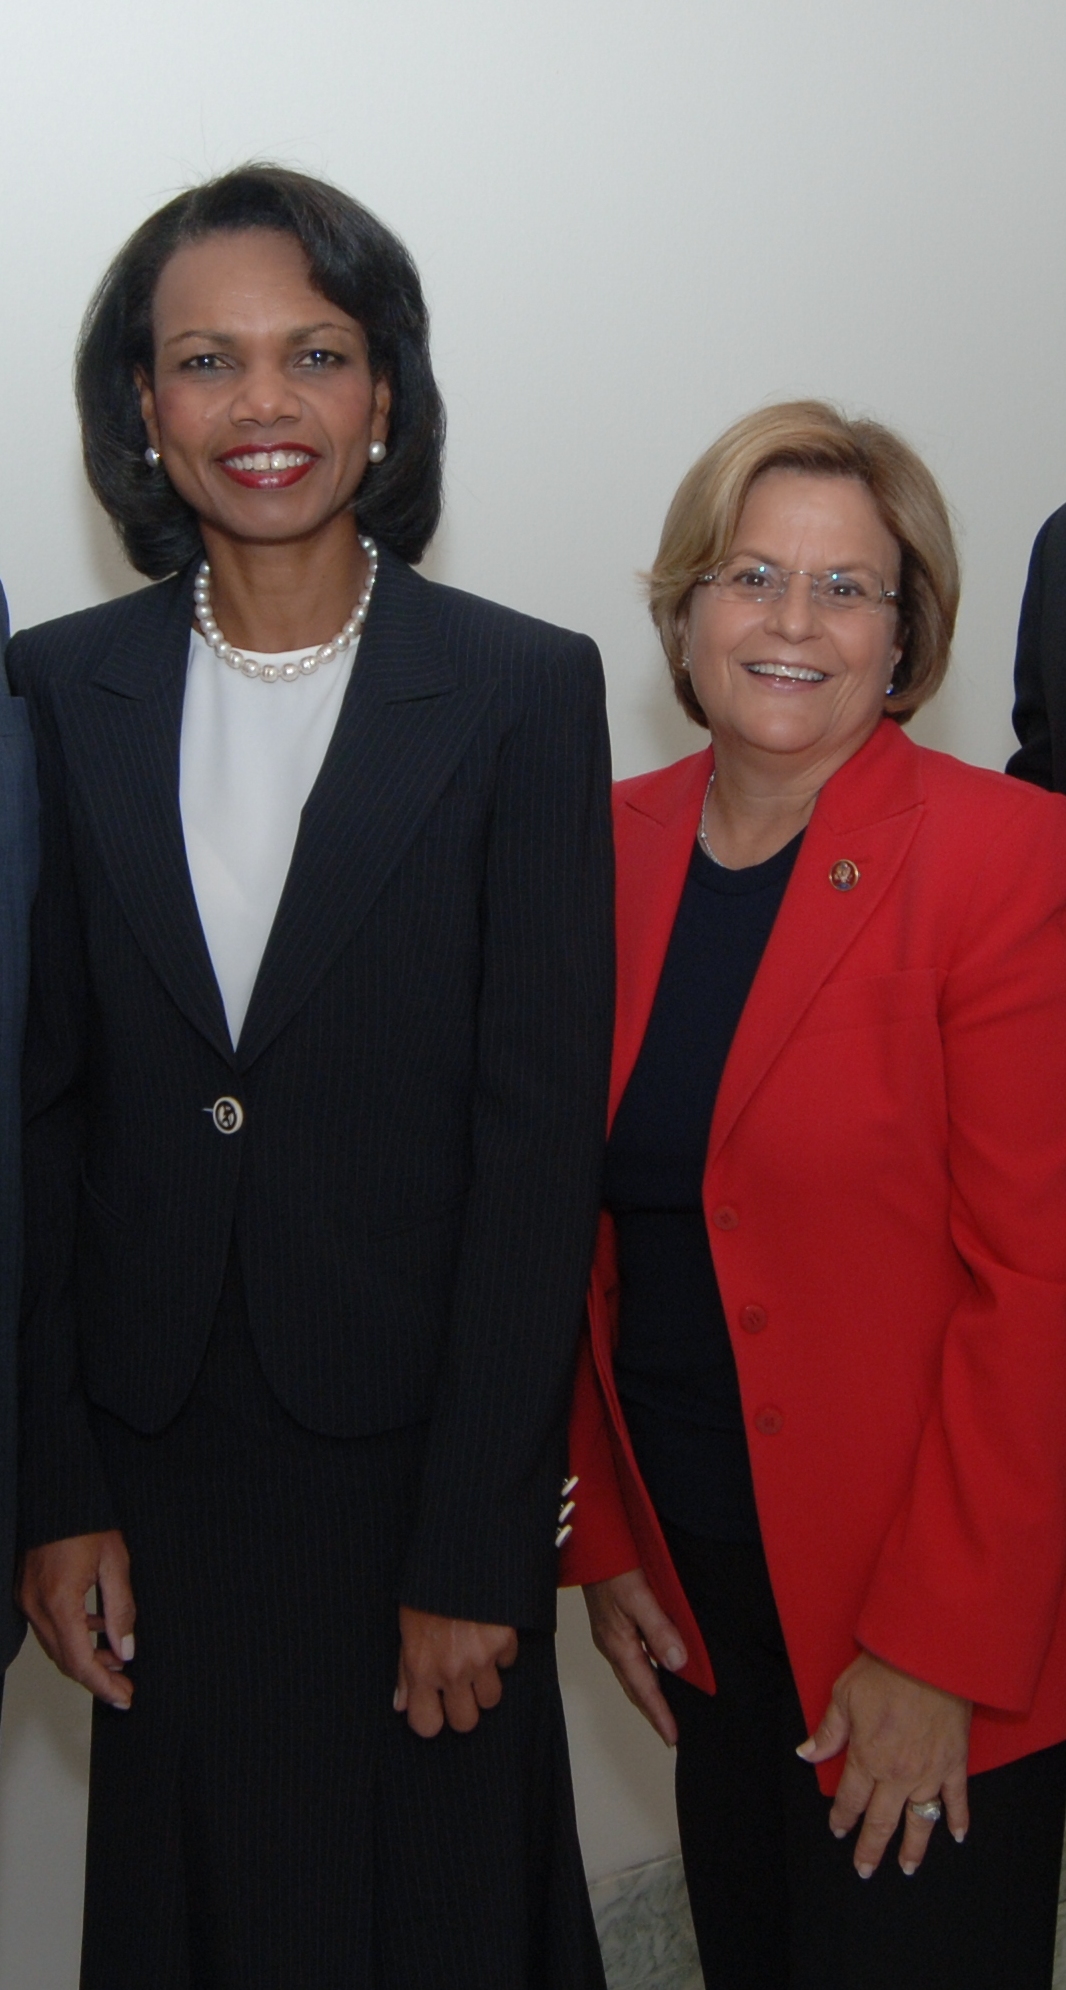 Ranking Member Ileana Ros-Lehtinen meets with Secretary of State Condoleezza Rice prior to House Foreign Affairs Committee hearing on U.S. Policy towards the Middle East